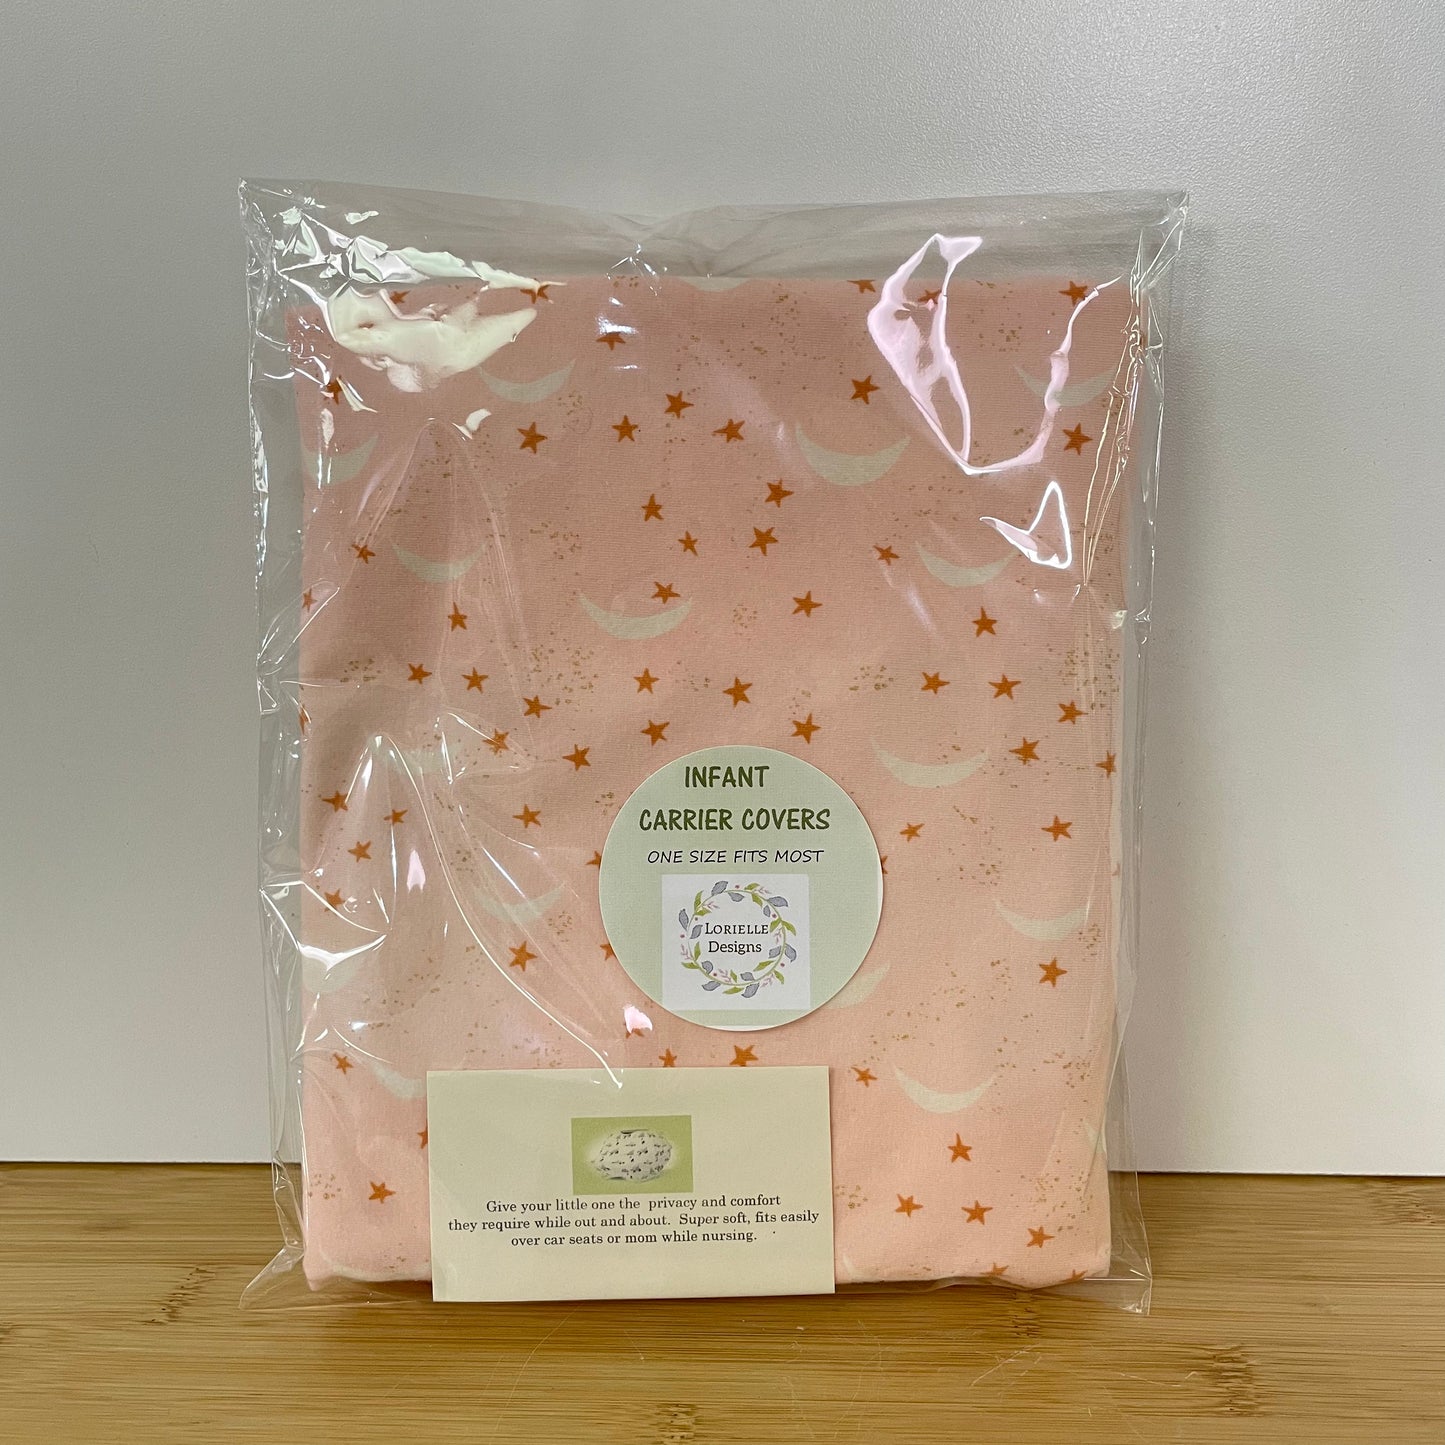 Infant Carrier Covers